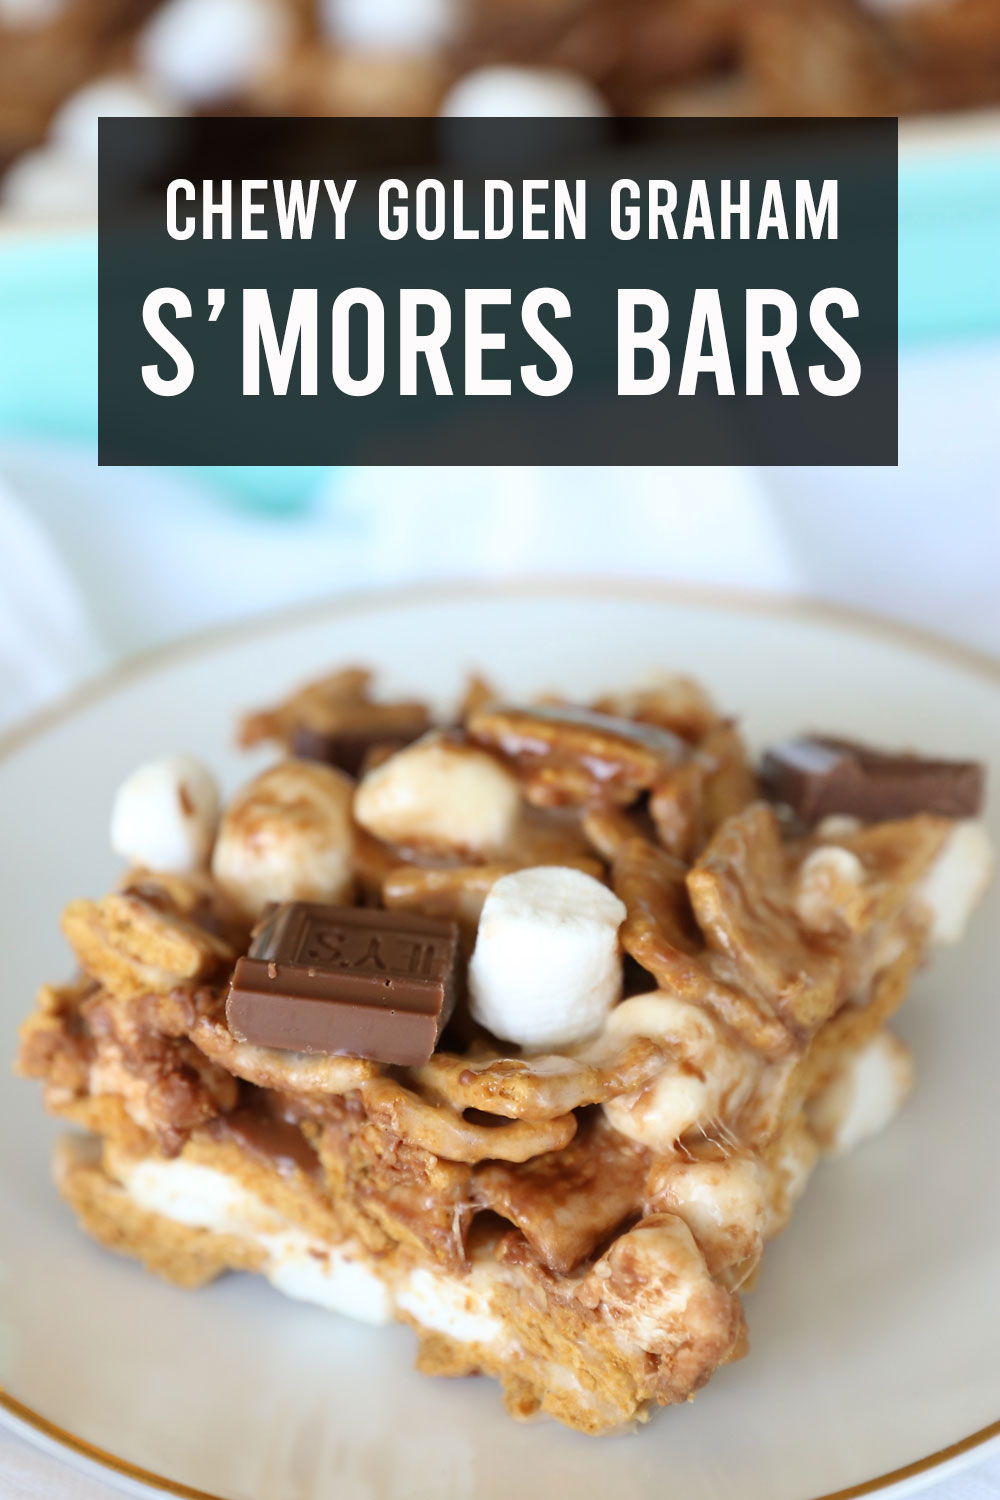 Chewy S'mores bars made with Golden Grahams, marshmallows, and milk chocolate